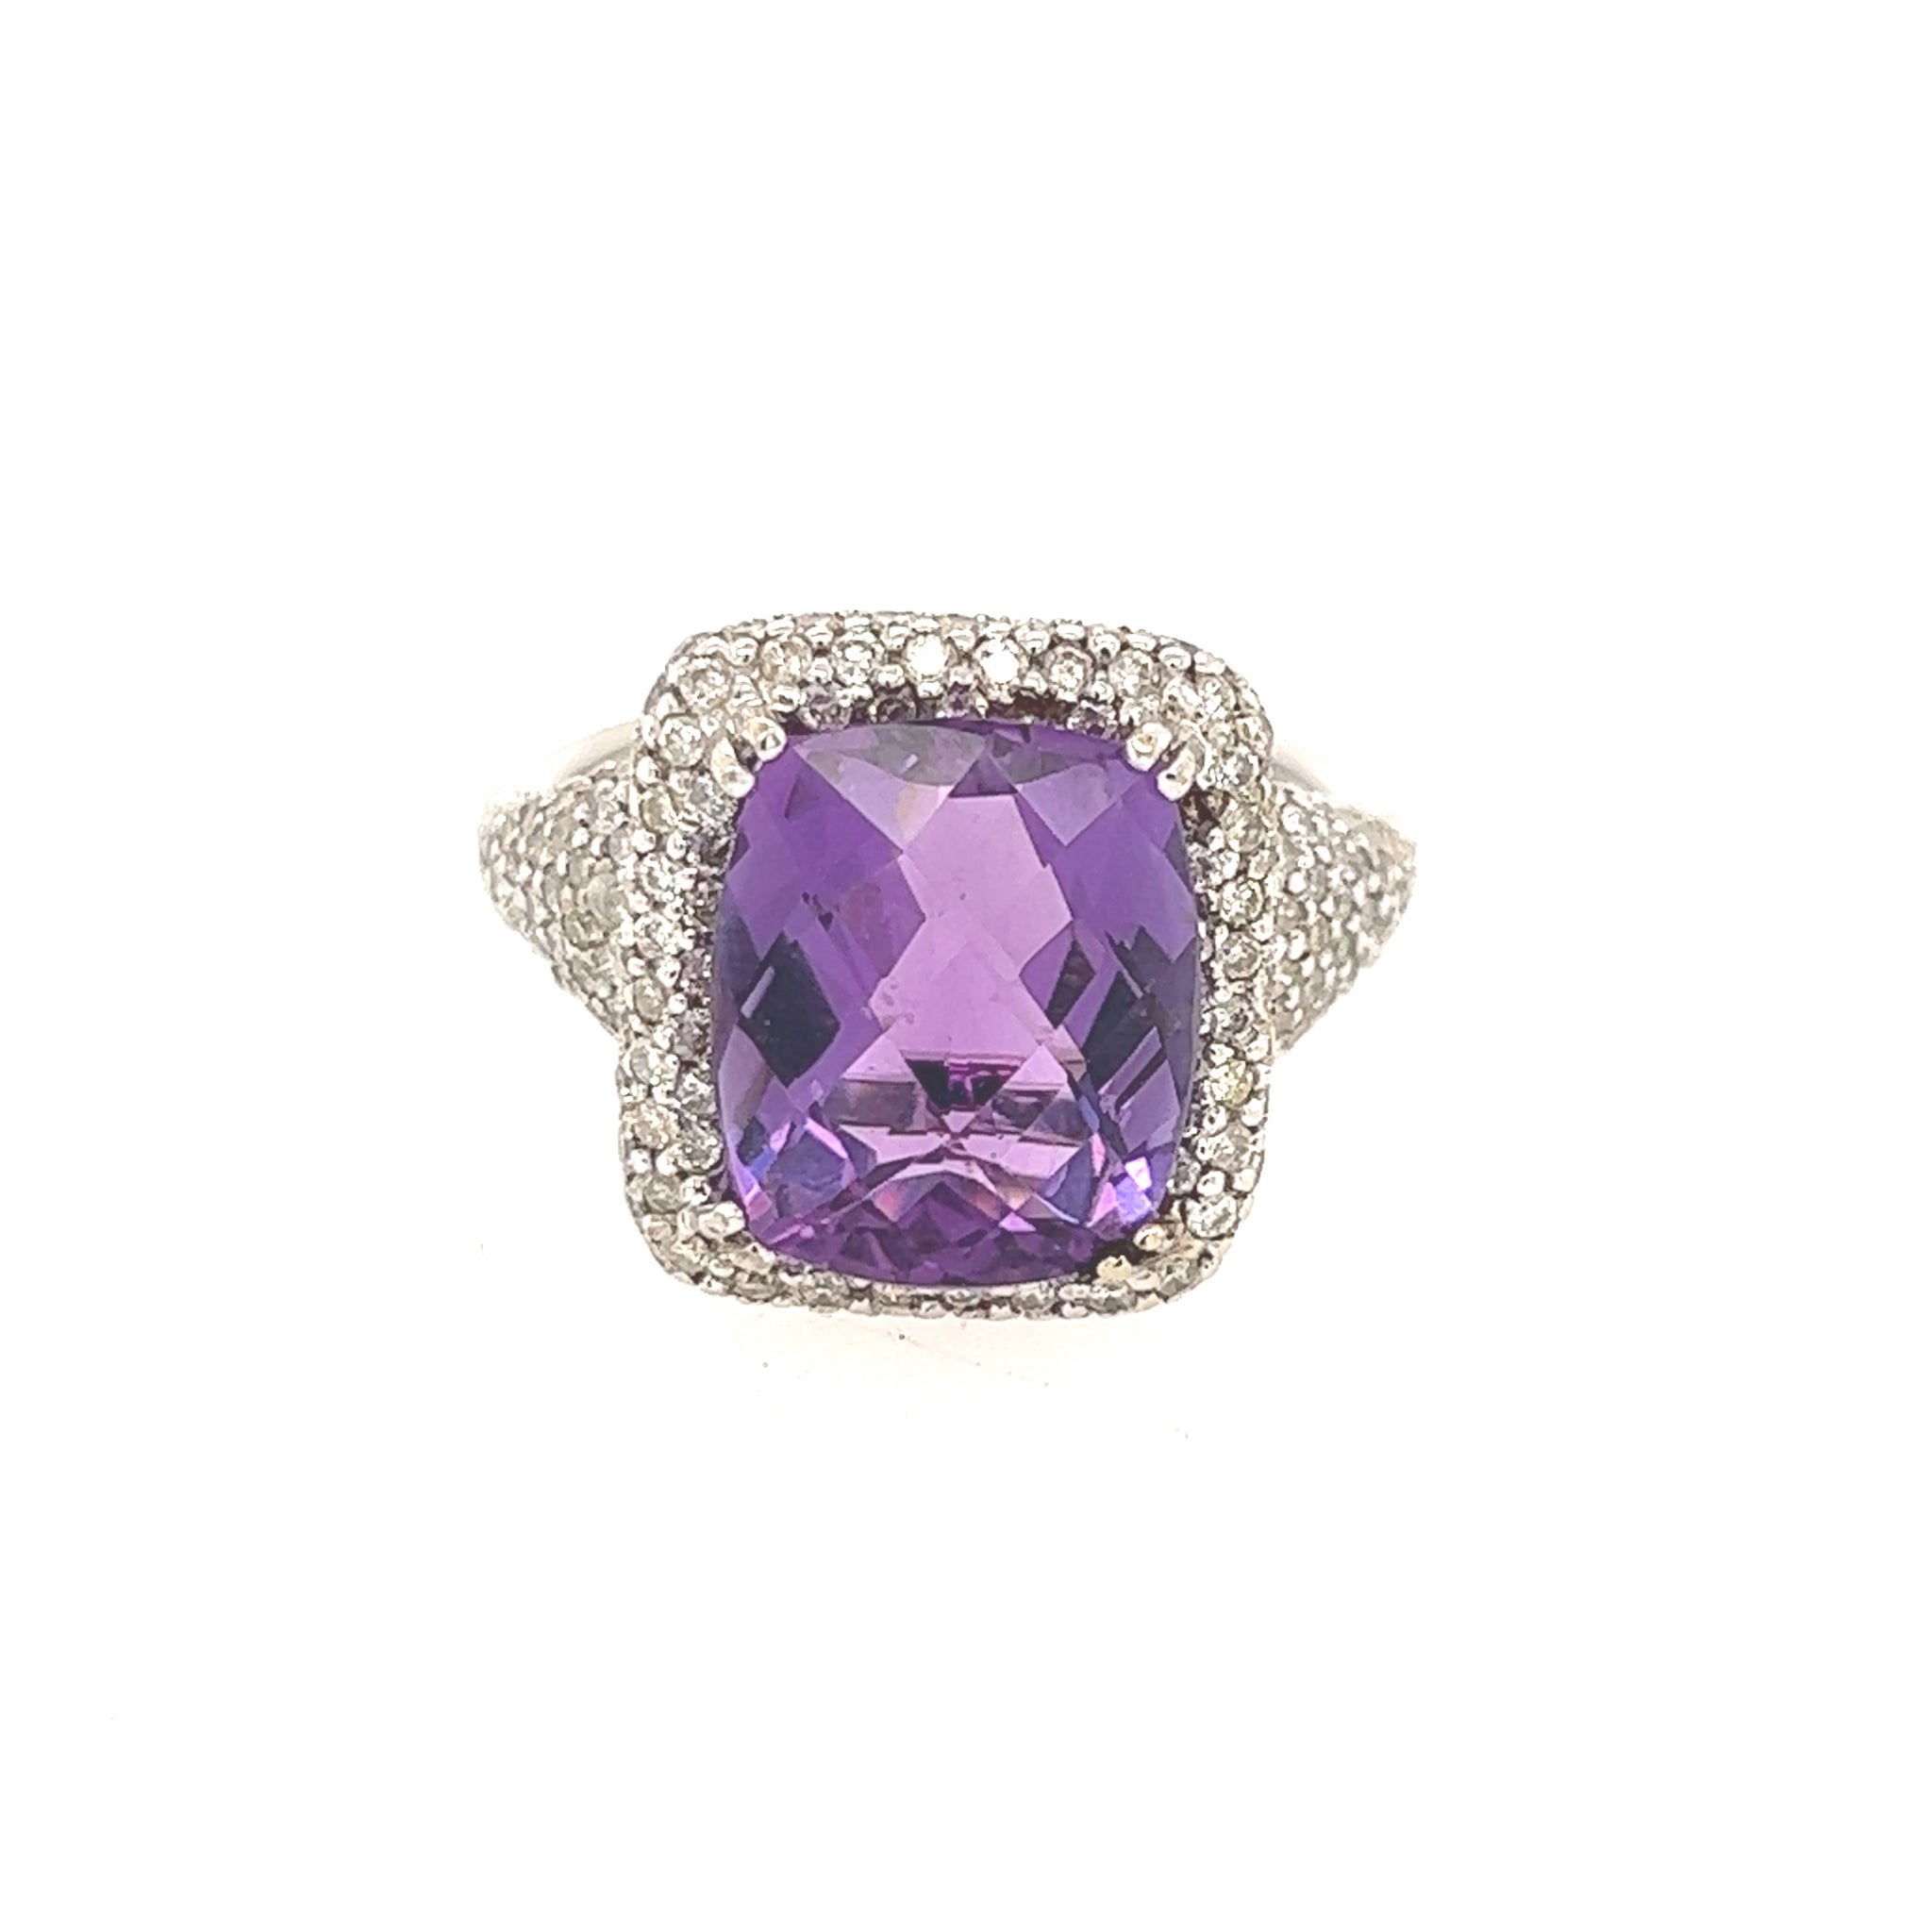 14K White Gold Amethyst Diamond Ring, Color Stone Statement Ring Size 6 1/2 US